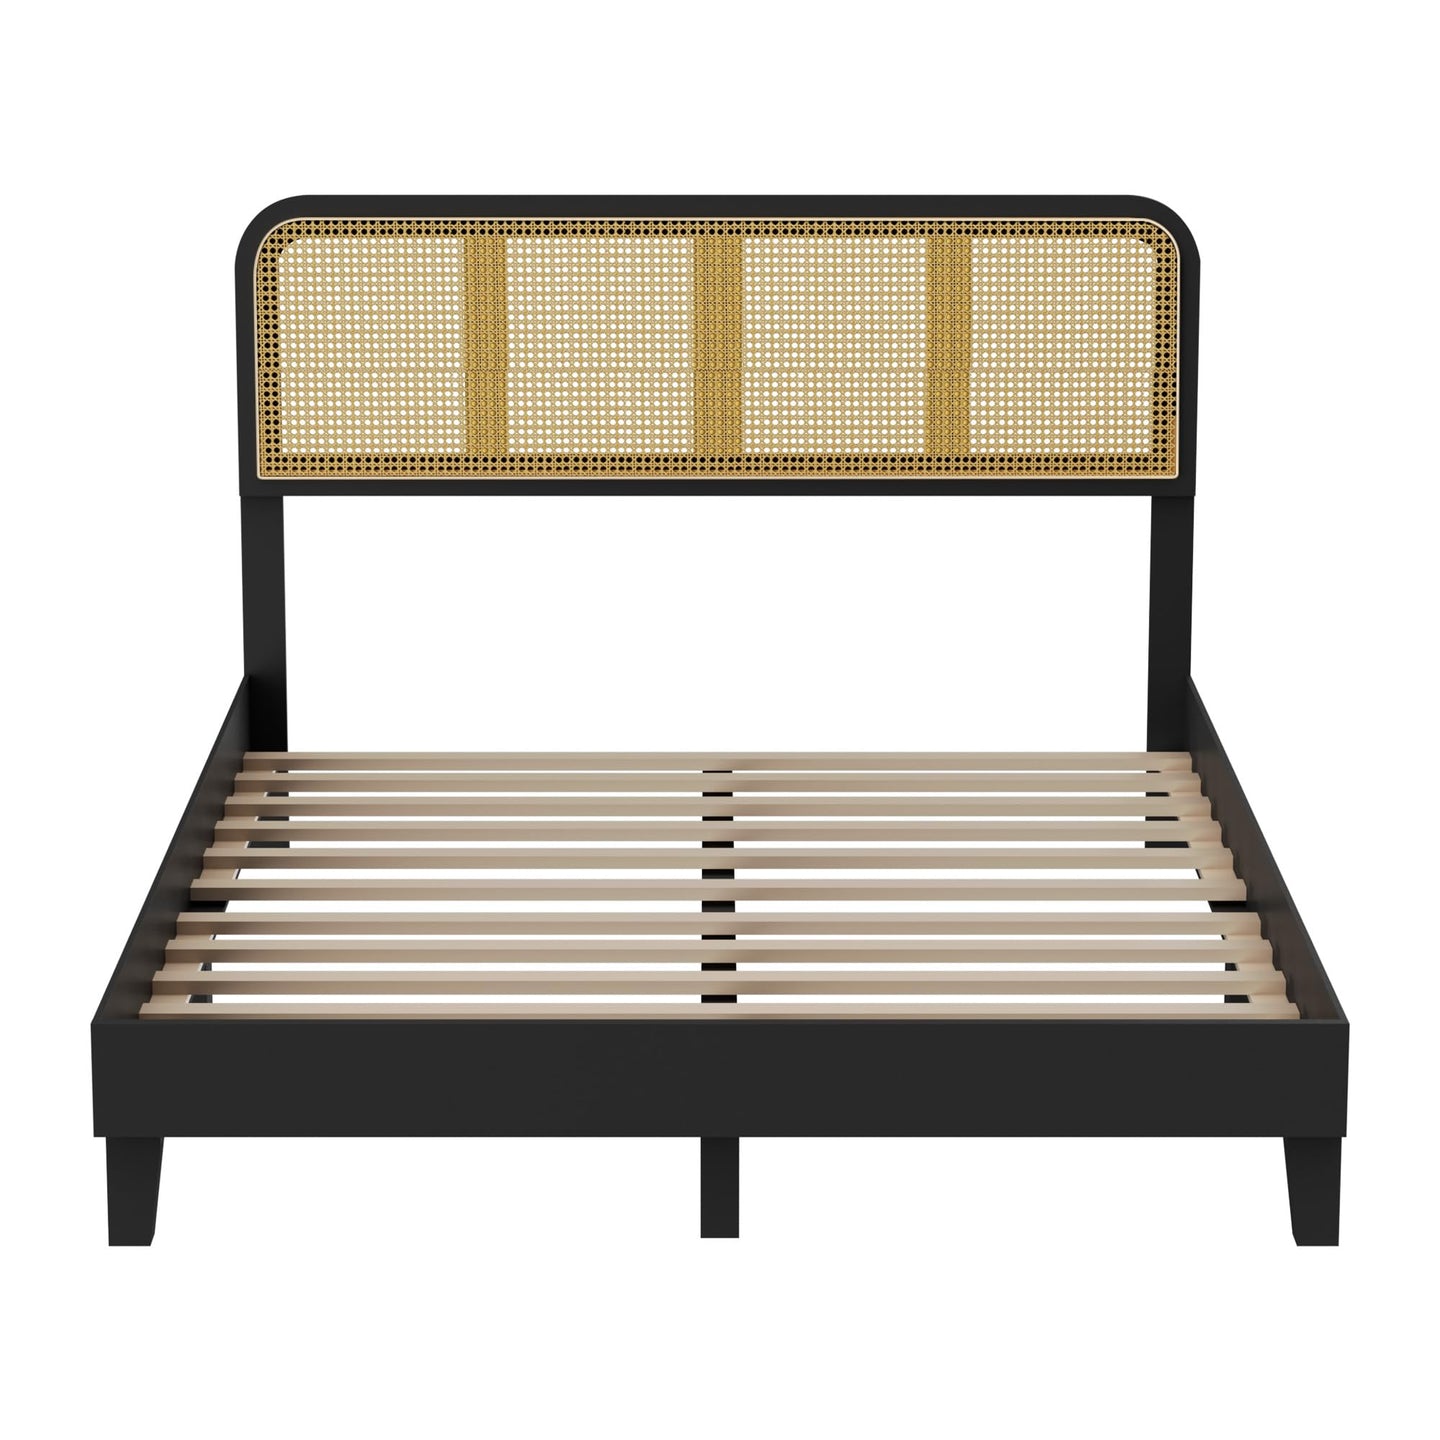 Cozy Castle Rattan Queen Size Bed Frame, Boho Platform Bed Frame with Adjustable Rattan Headboard and Wooden Support Slats, No Box Spring Needed, Black